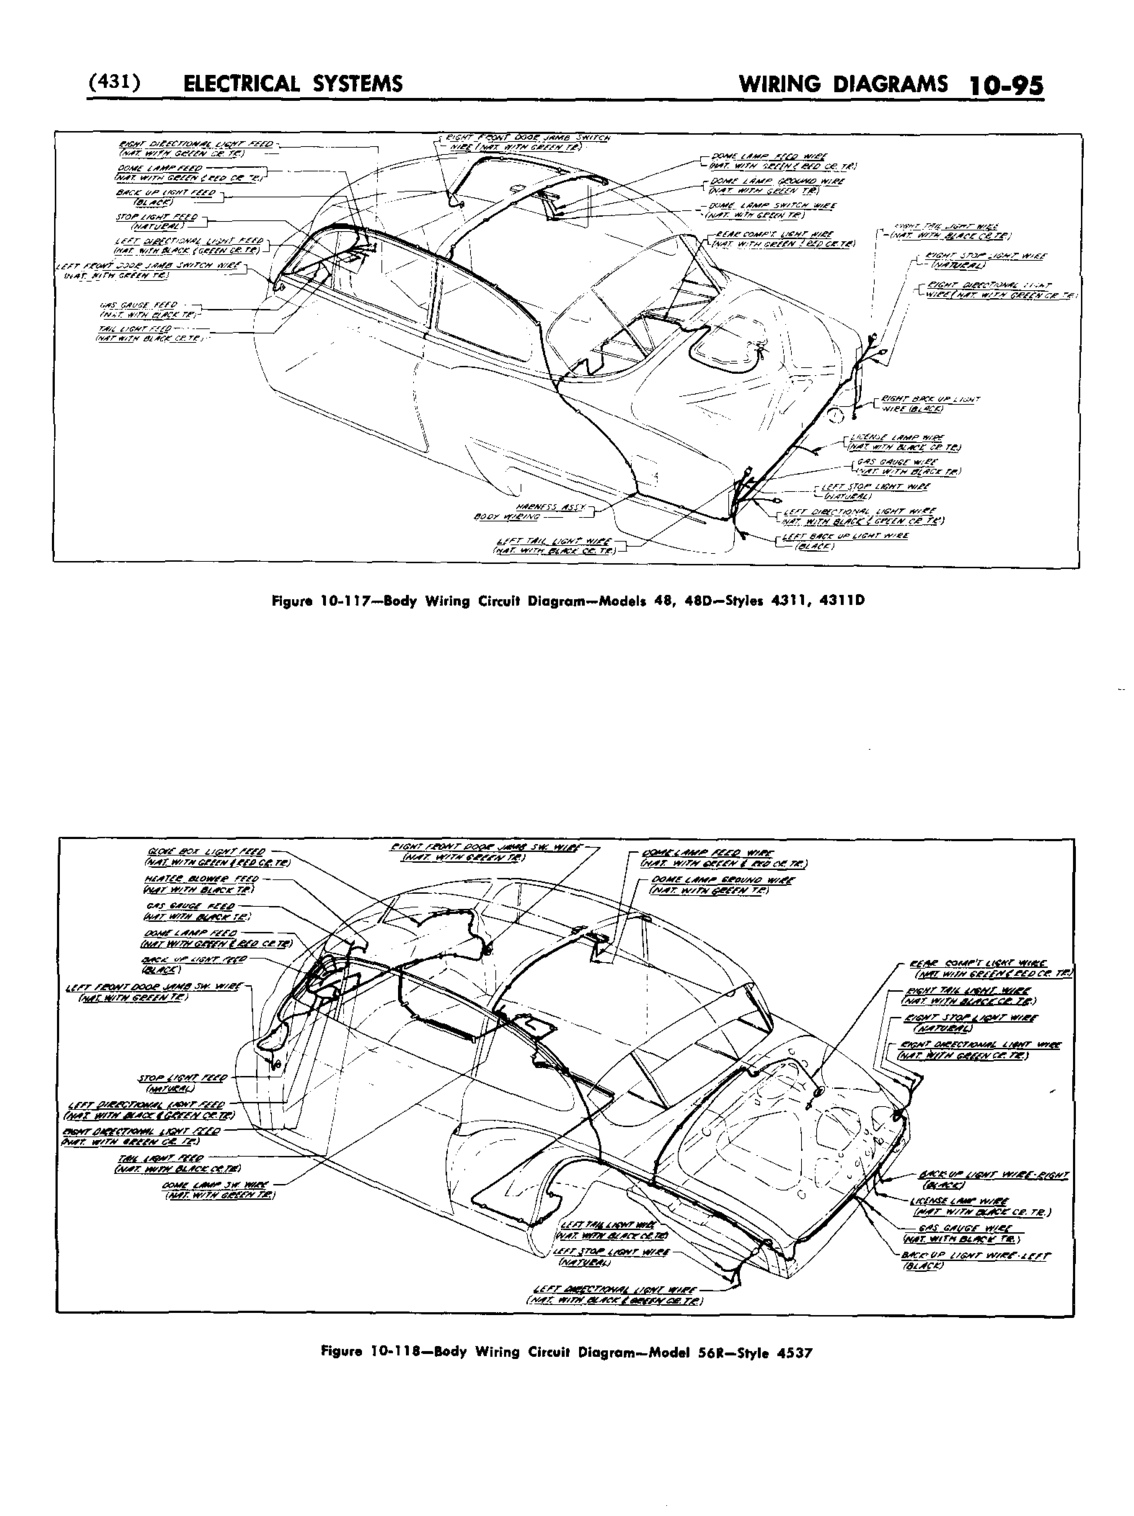 n_11 1952 Buick Shop Manual - Electrical Systems-095-095.jpg